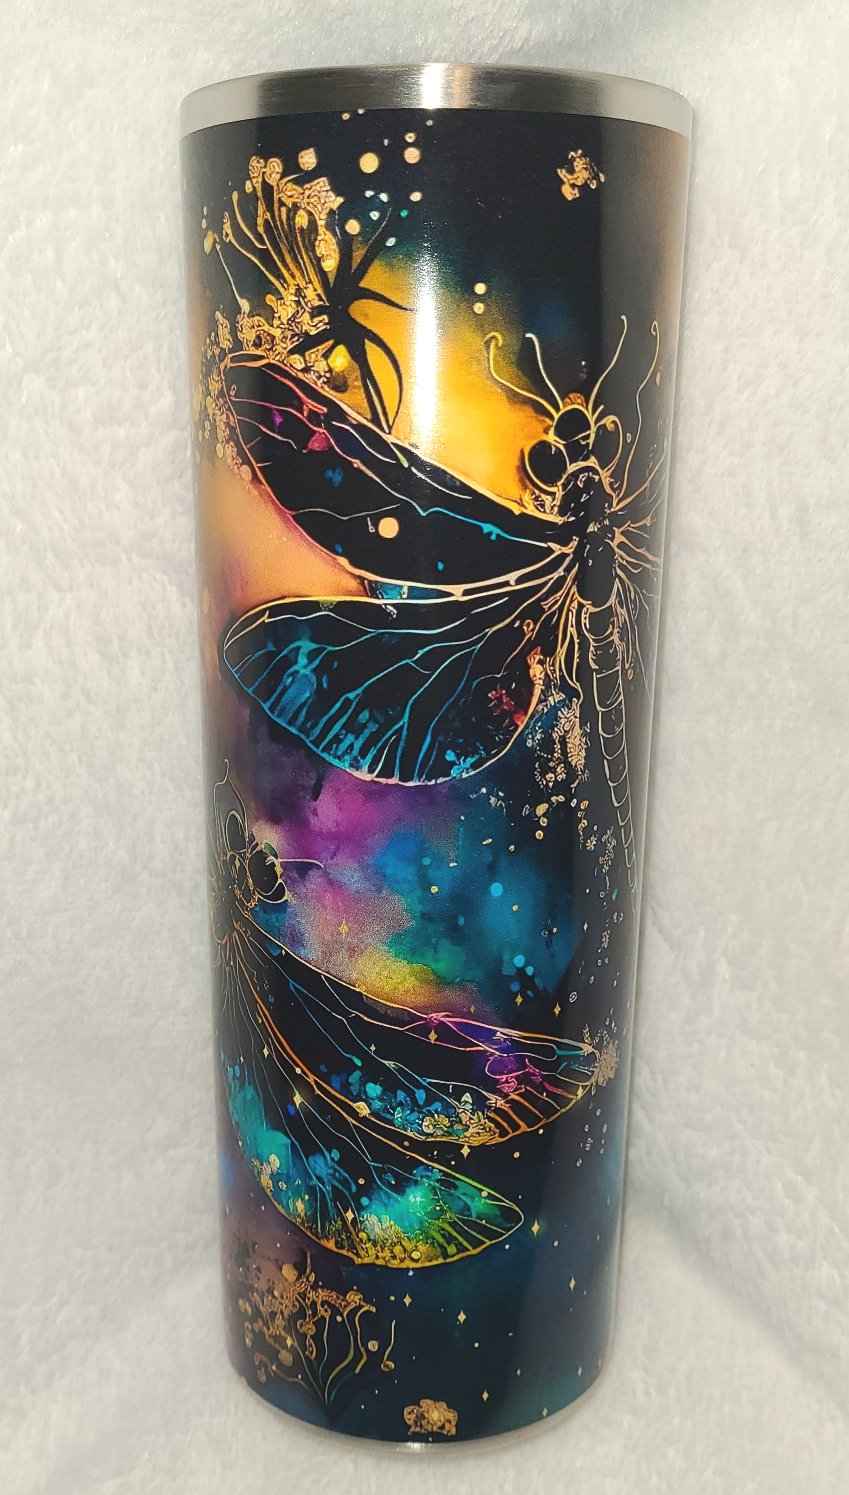 Cup 4- 20oz dragonfly night cup